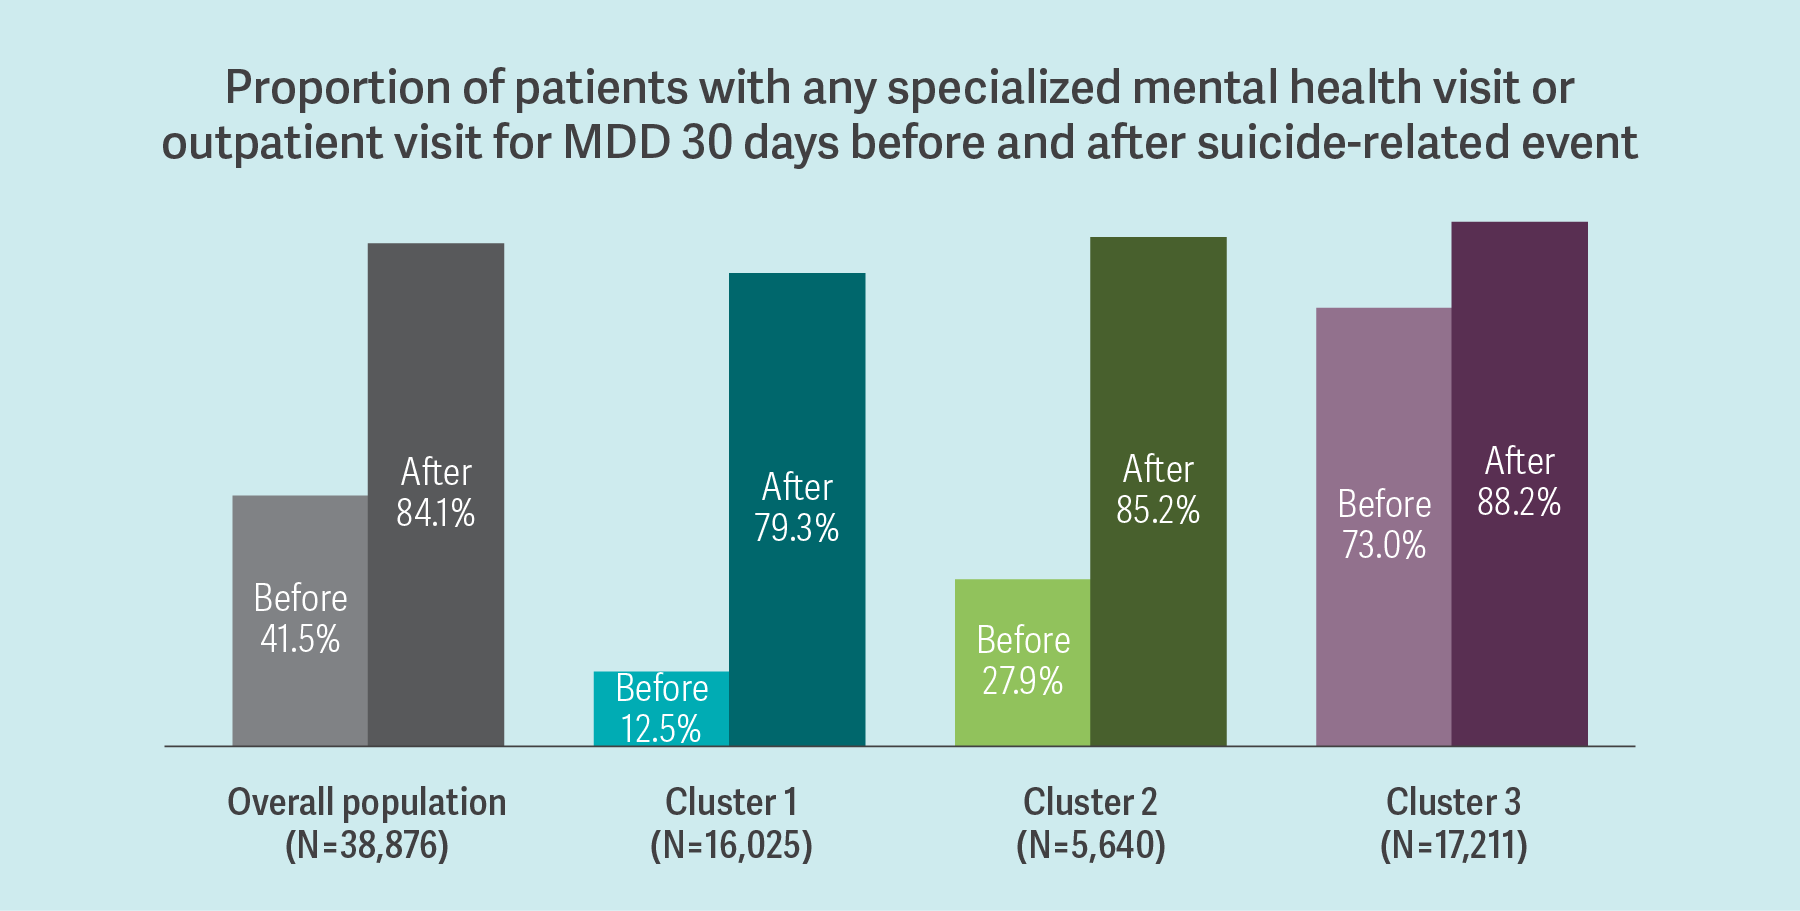 Proportion of patients with any specialized mental health visit or outpatient visit for MDD 30 days before and after suicide-related event